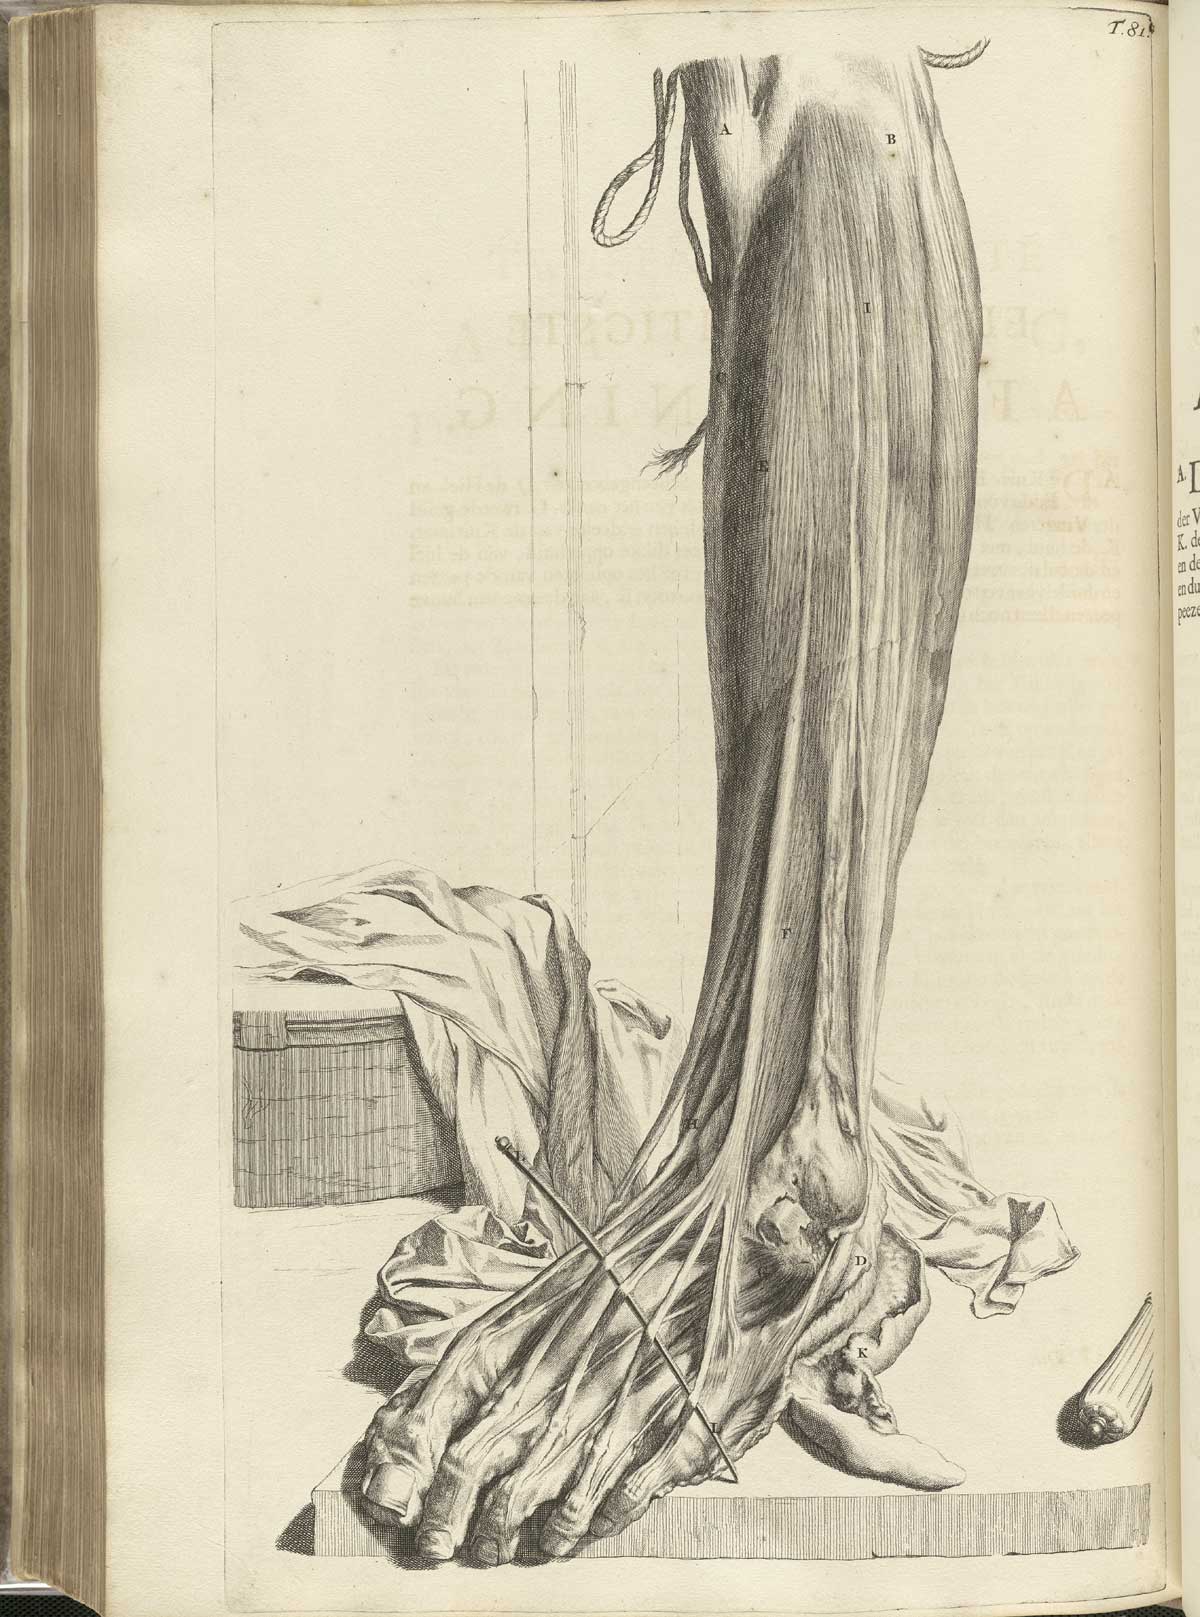 Engraving of a dissected foot and shin with muscles and sinews of the front of the shin and top of the foot separated by dissecting instruments for a detailed view; leg and foot are presented as if the subject is standing with a draped sheet behind it and tools affixing the flesh to a wooden board underneath; from Govard Bidloo’s Ontleding Des Menschelyken Lichaams, Amsterdam, 1690, NLM Call no. WZ 250 B5855anDu 1690.